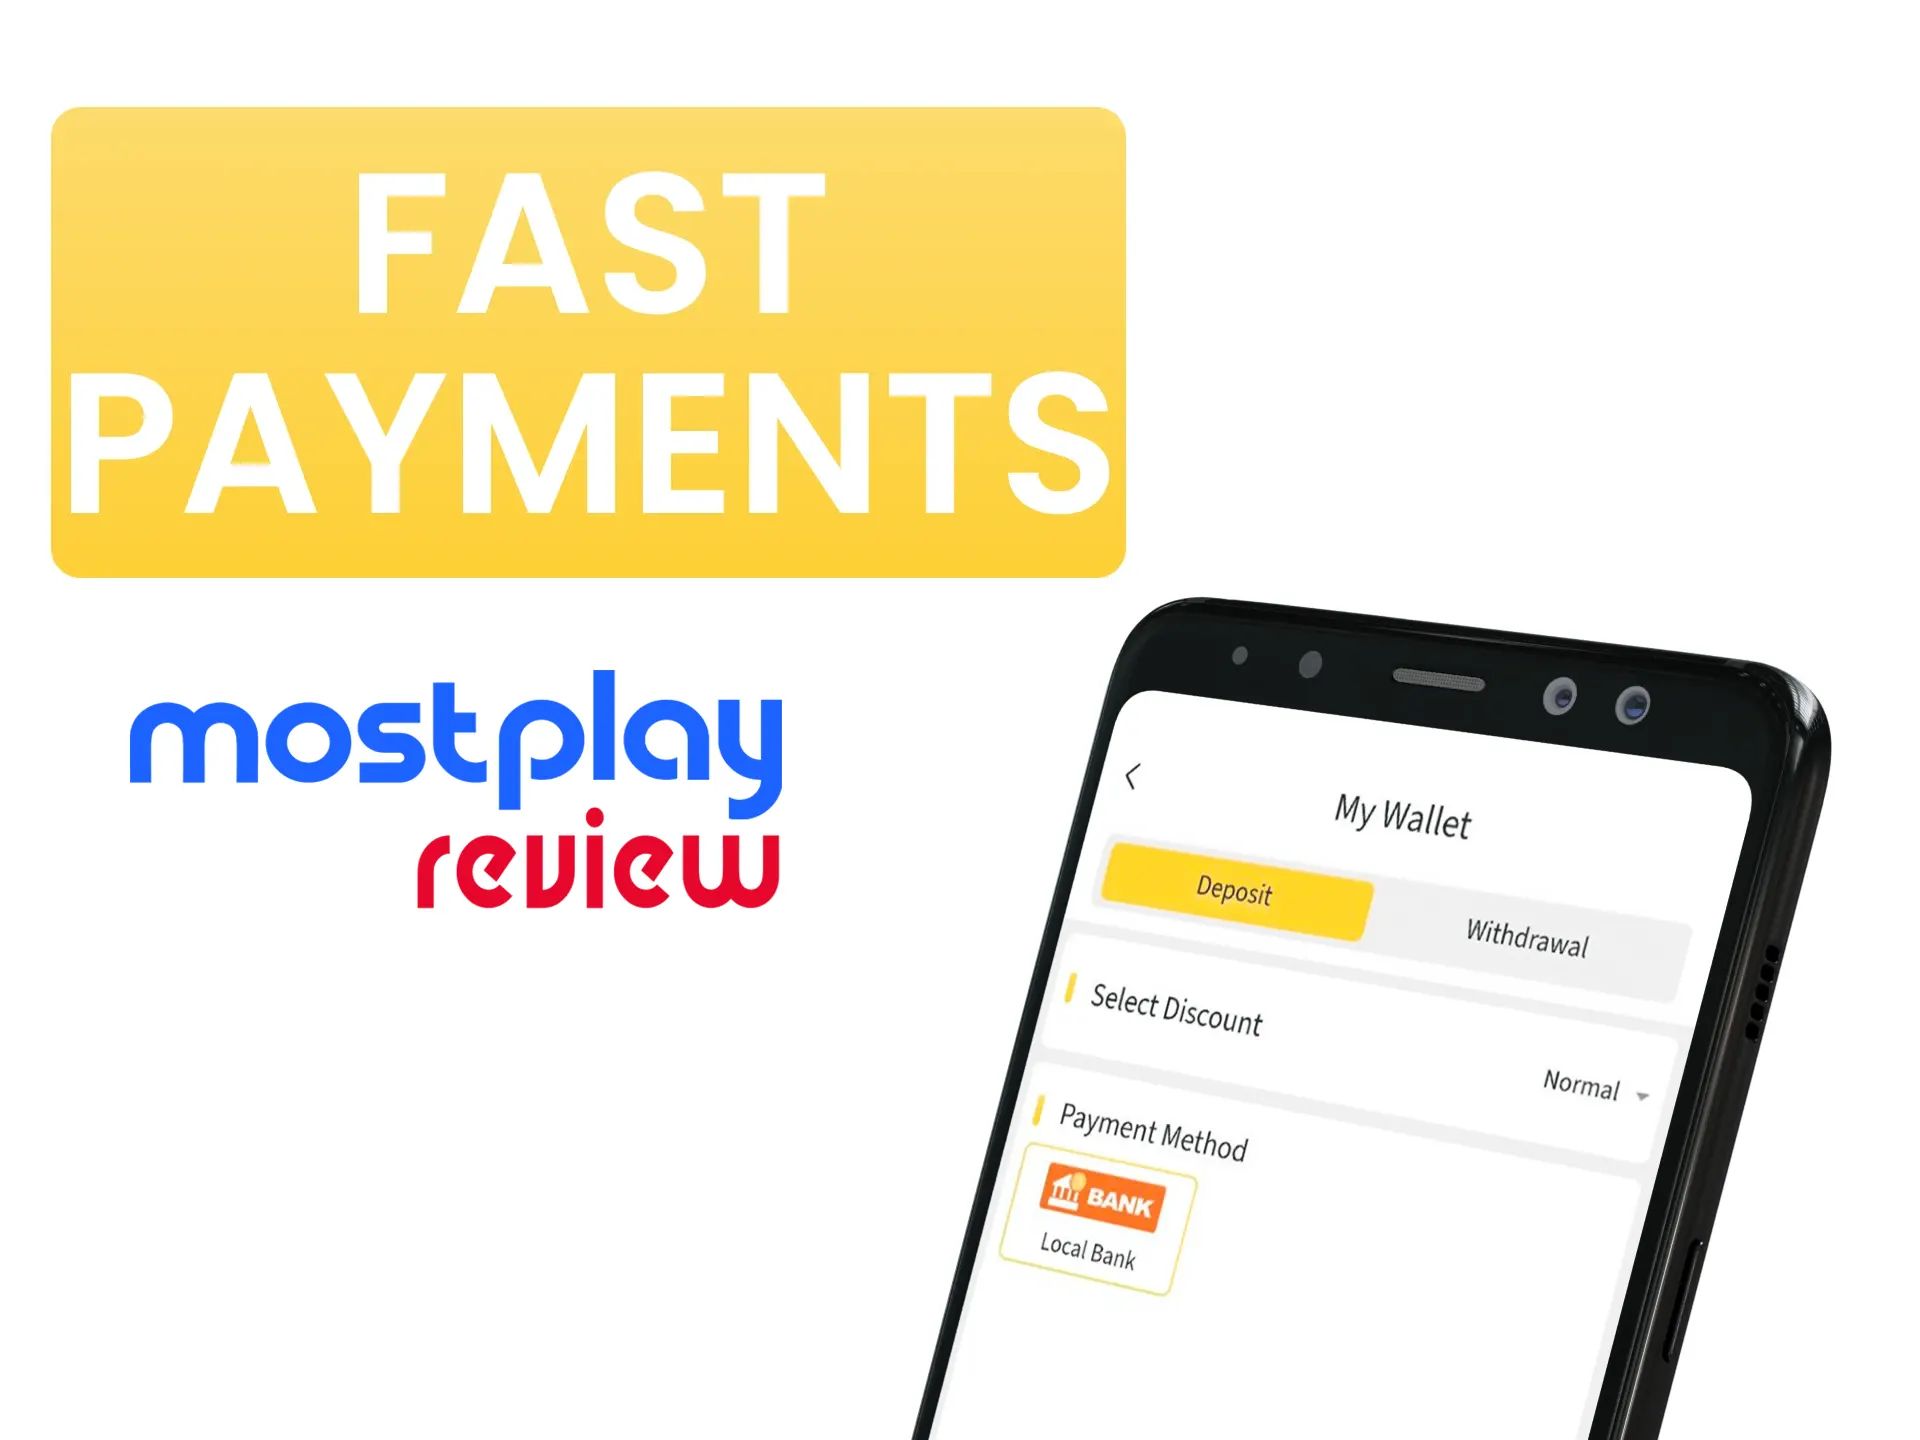 Make your payments quicker at Mostplay.